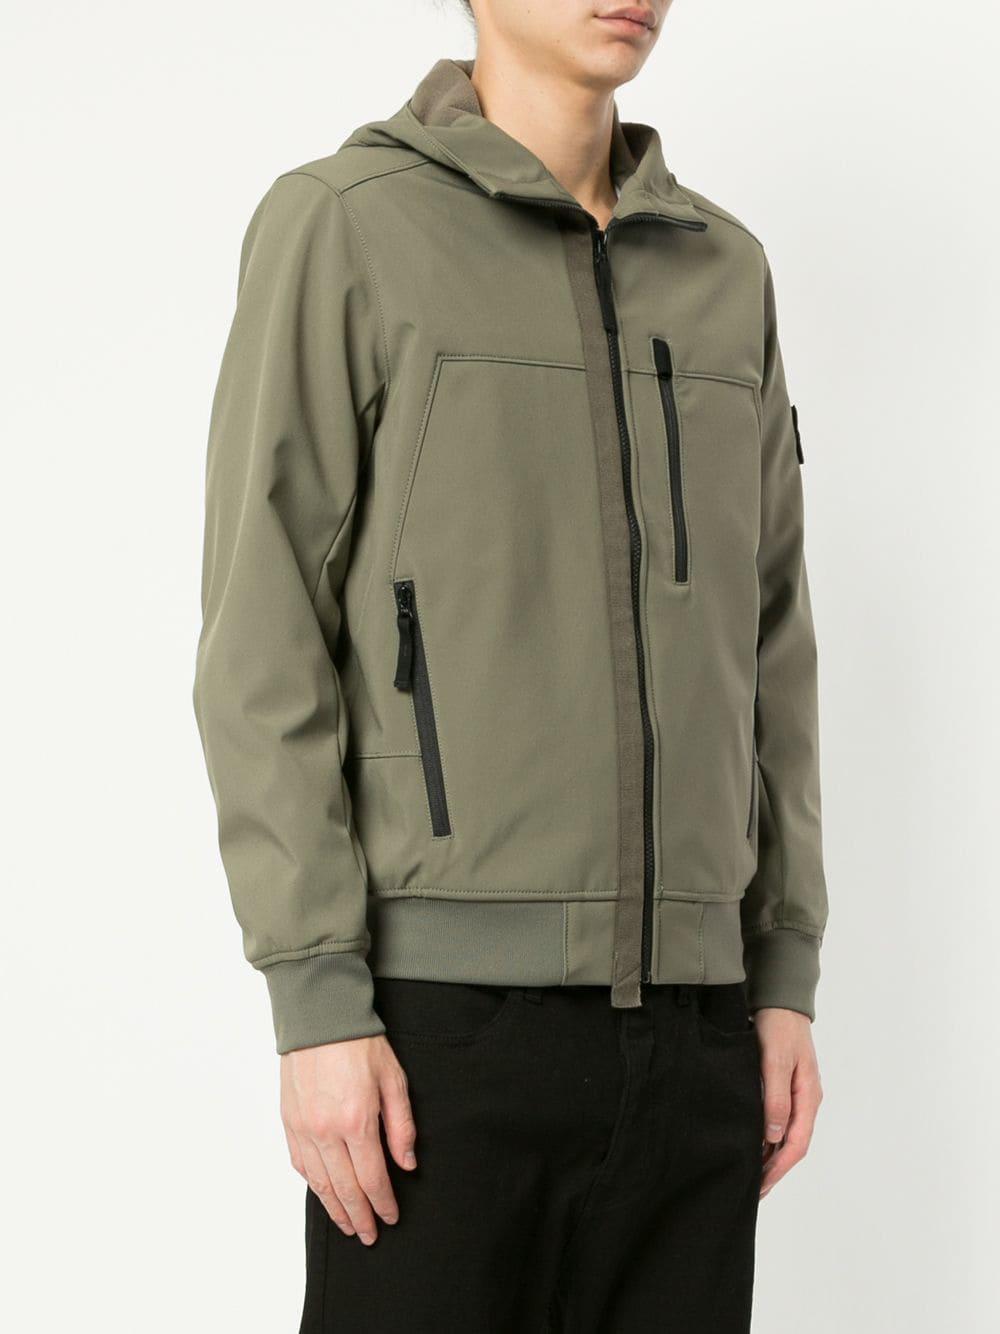 Stone Island Synthetic Q0522 Soft Shell-r Jacket in Green for Men - Lyst